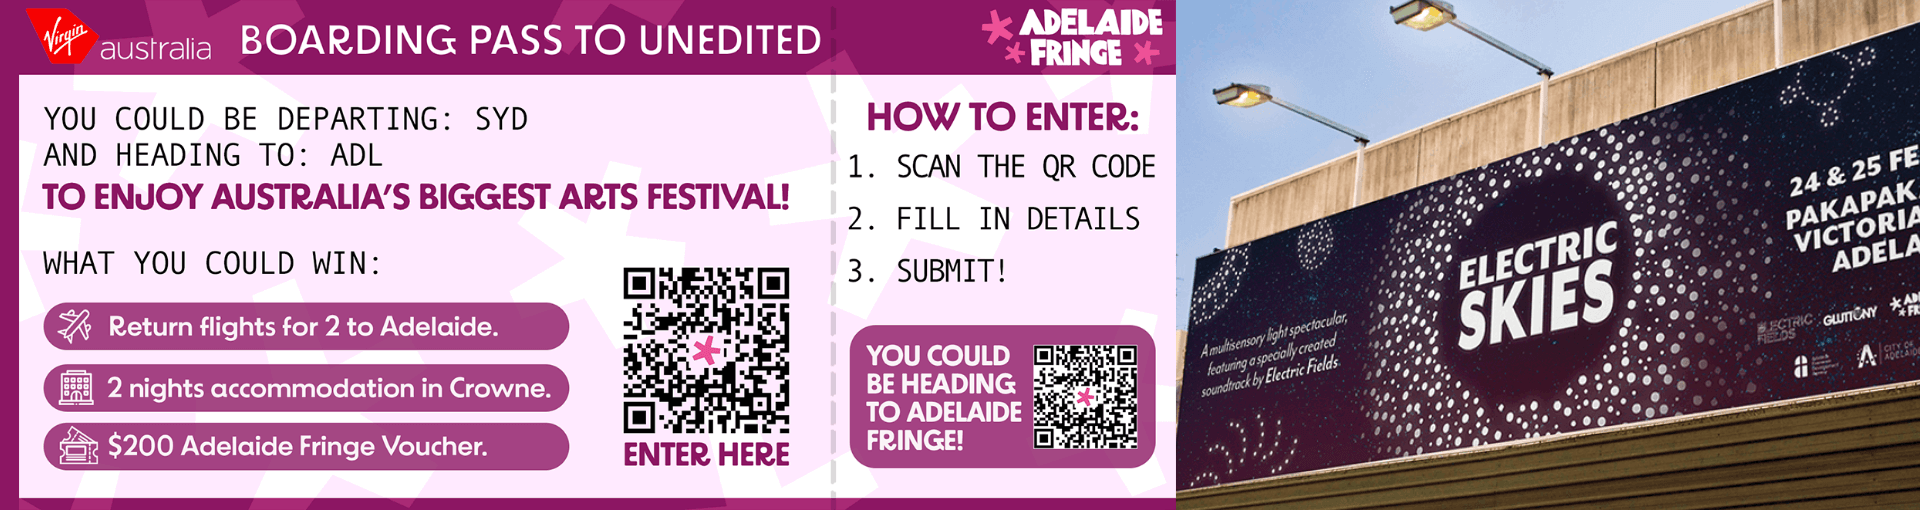 Adelaide Fringe tickets and billboard advertisement